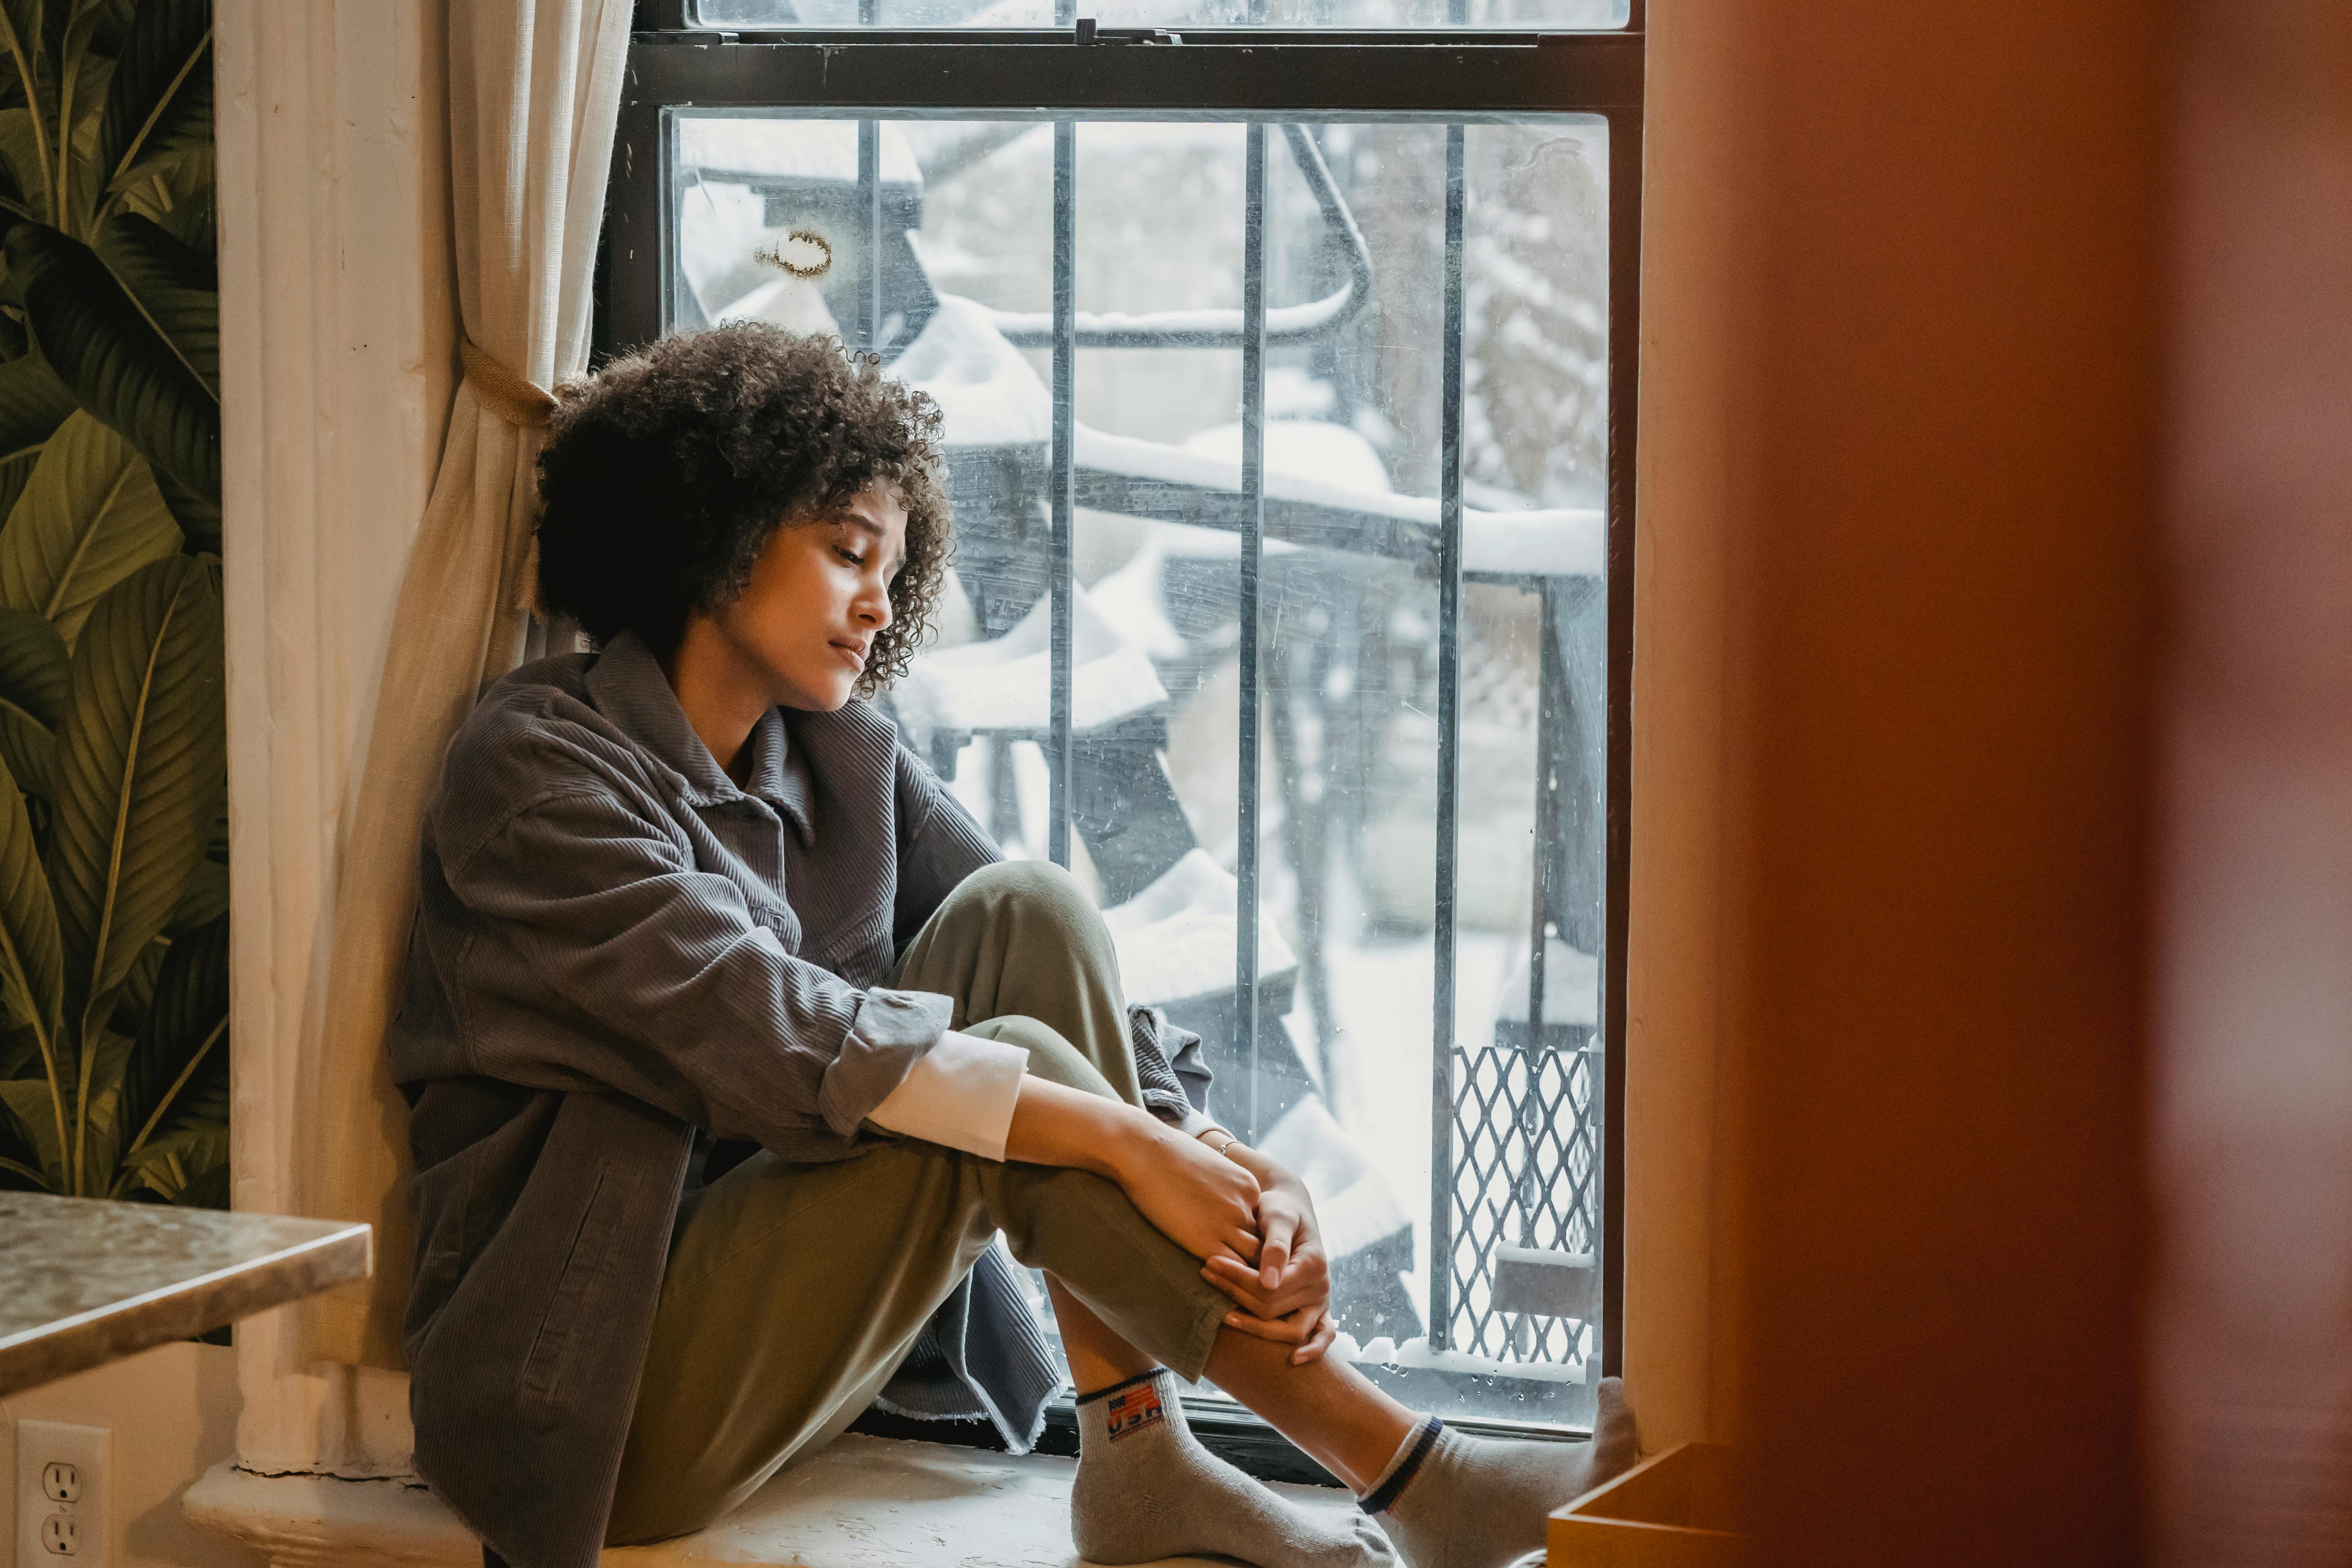 A woman sitting by a window contemplating her life | Source: Pexels